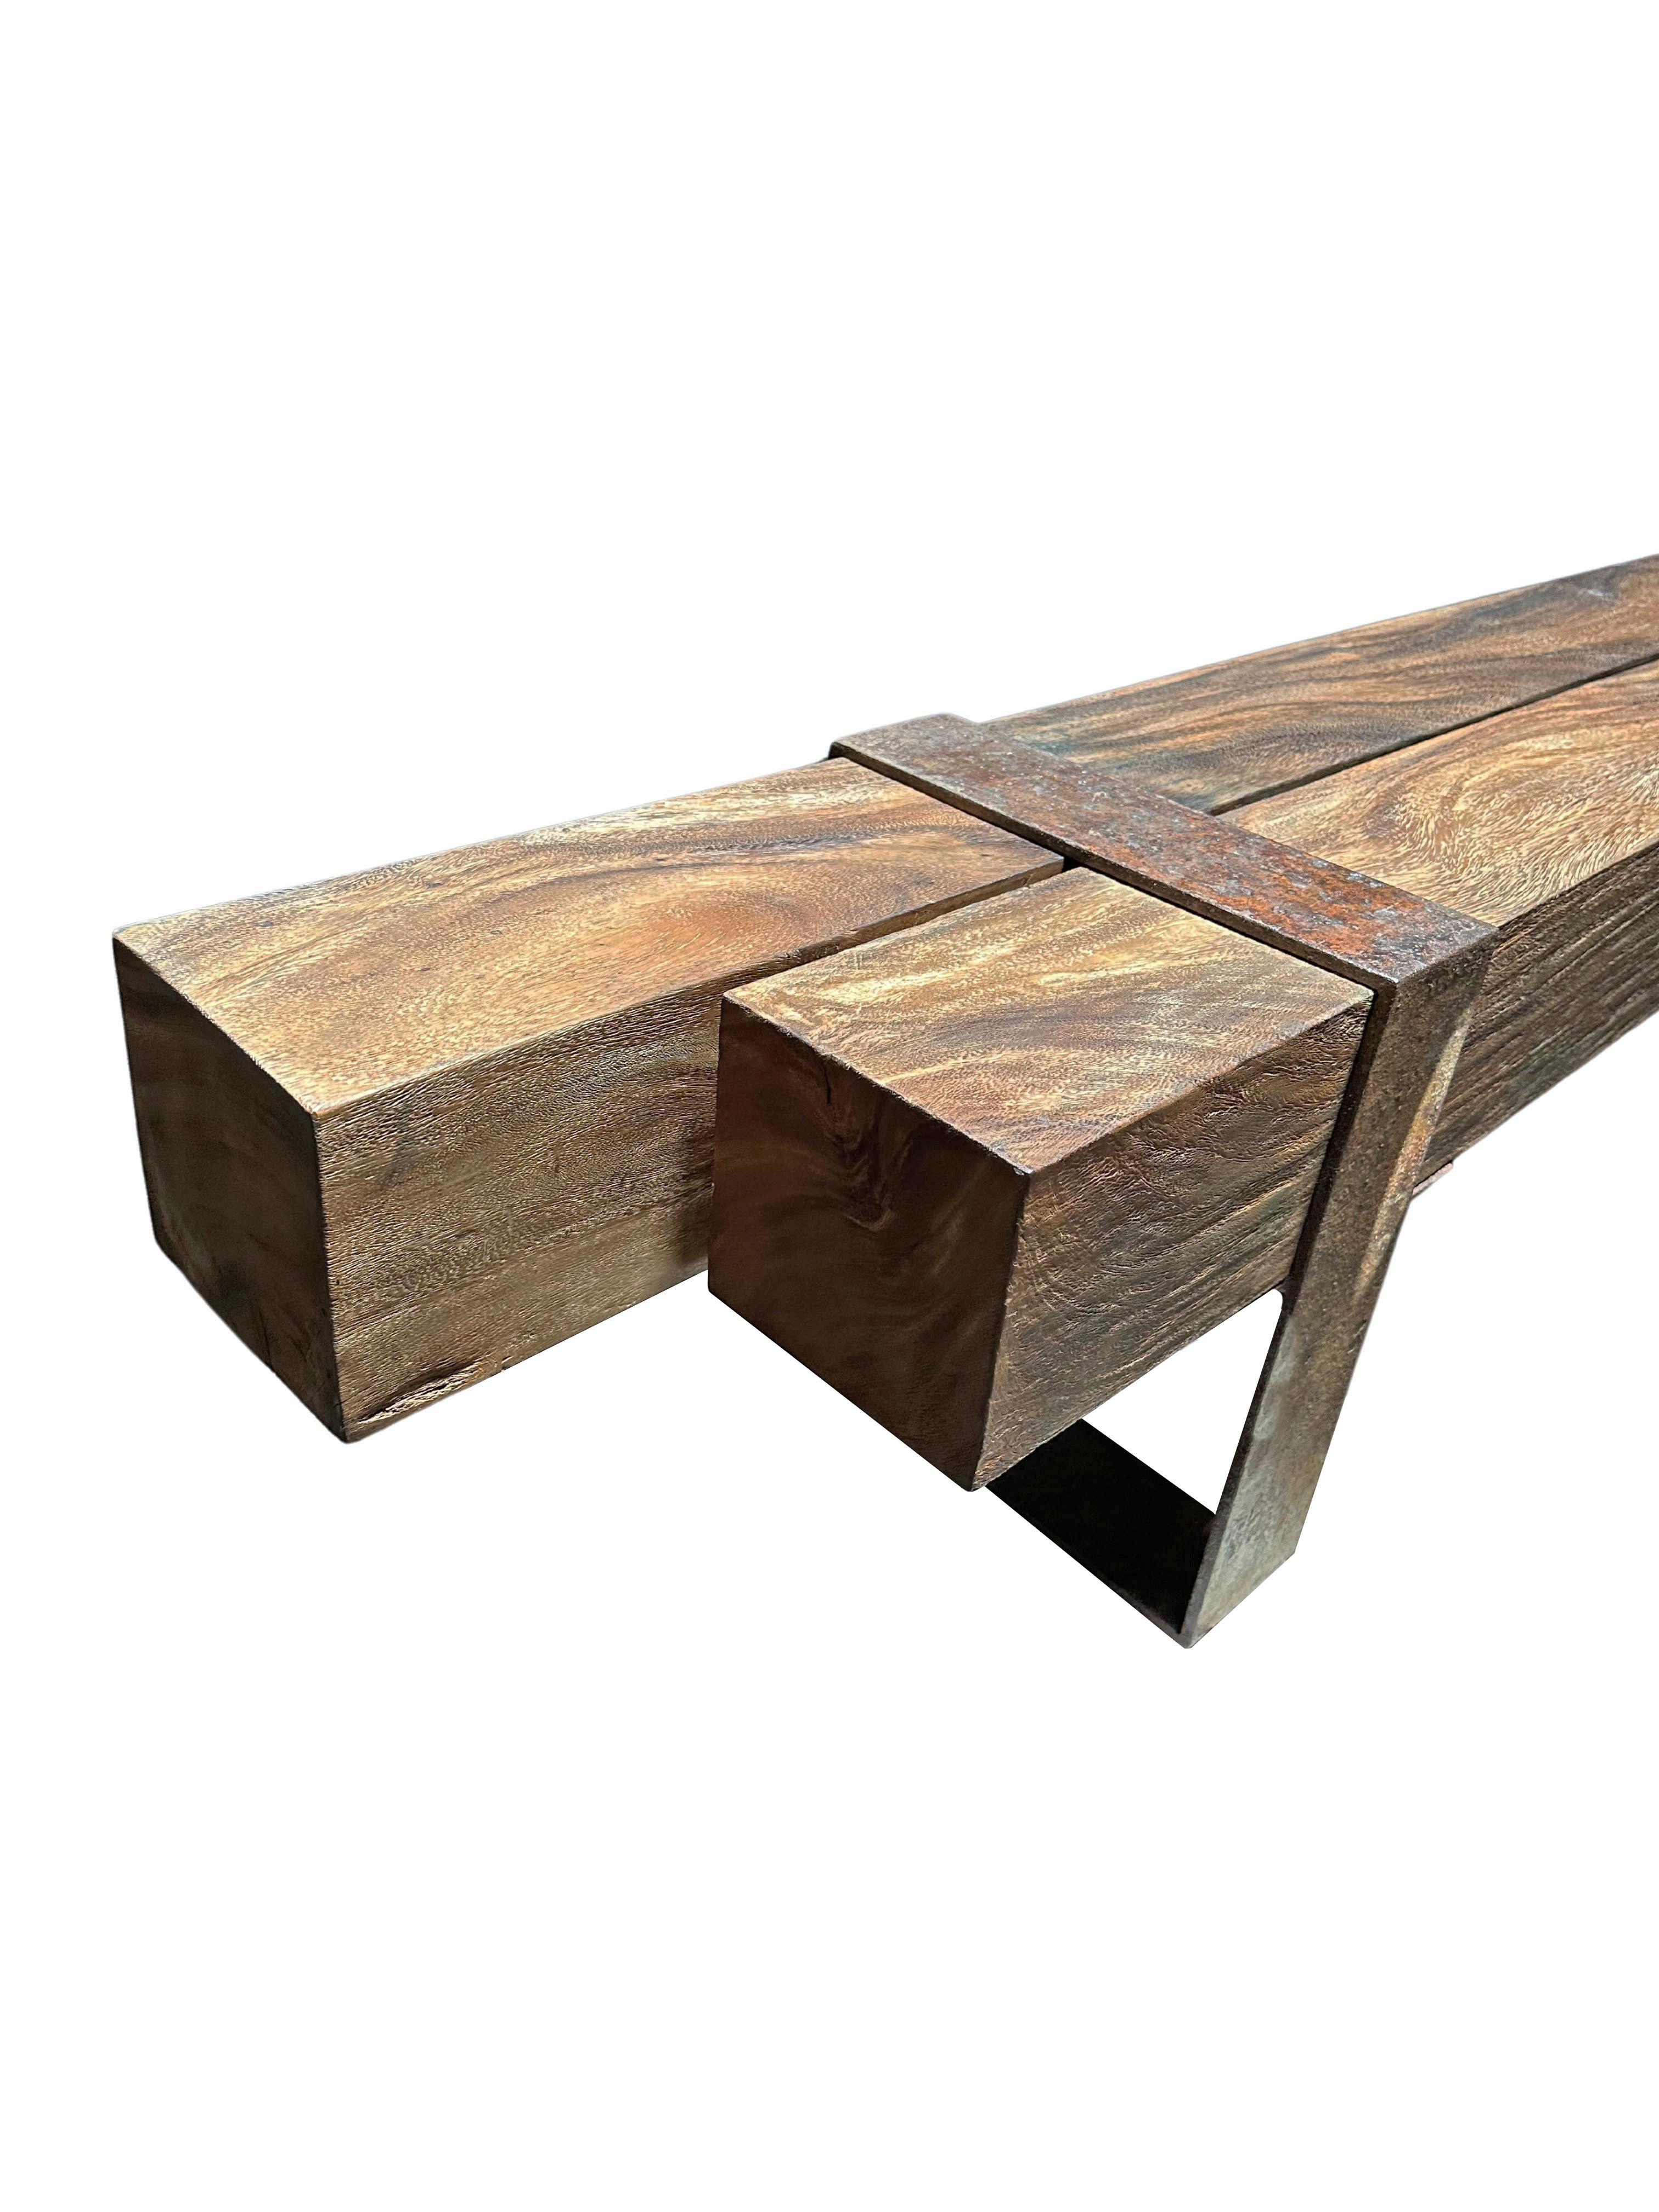 Indonesian Sculptural Suar Wood Bench with Steel legs, Modern Organic For Sale